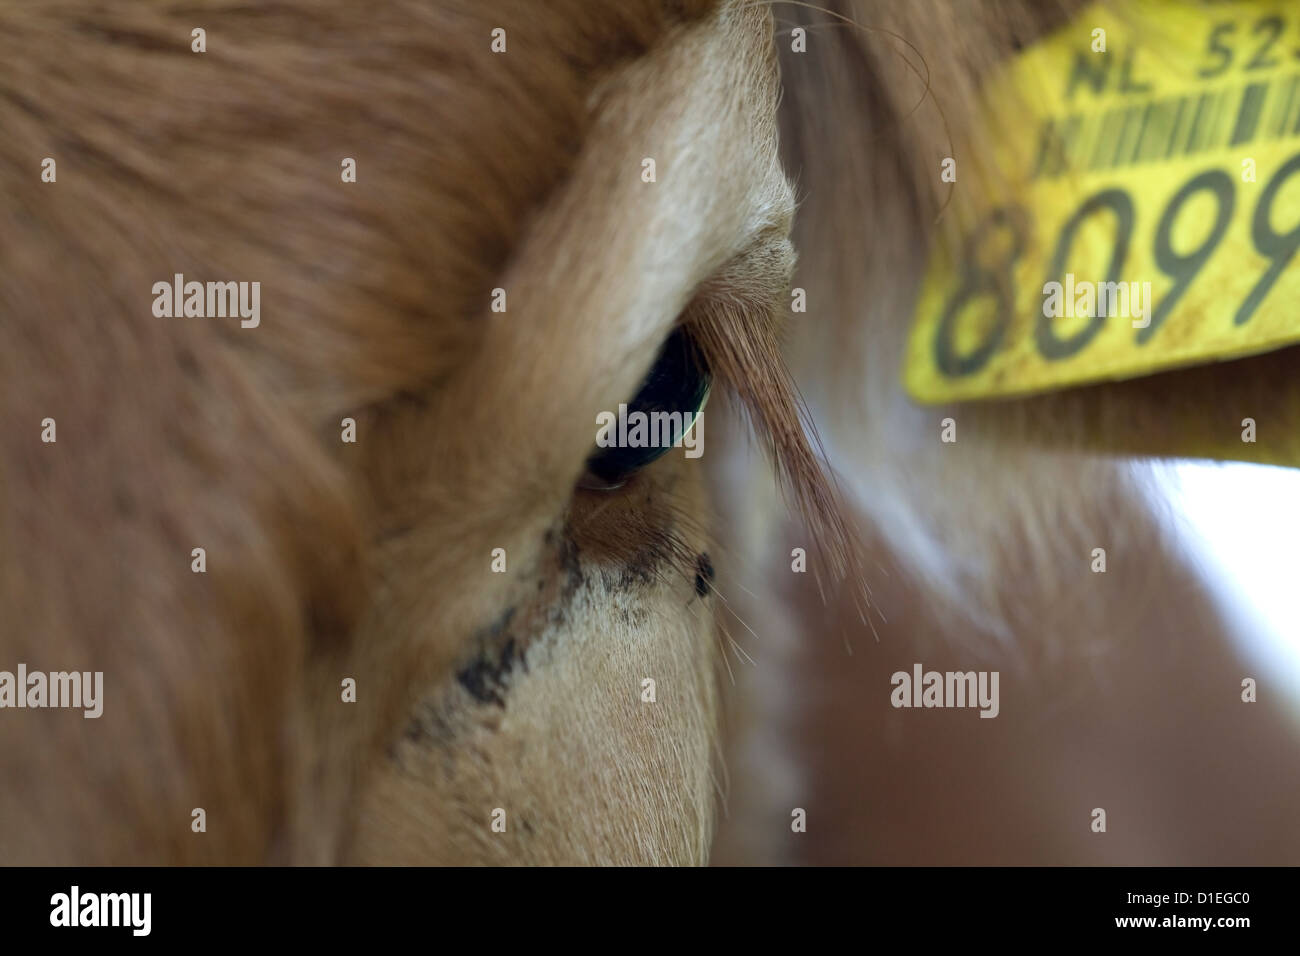 Eye of a cow in the Netherlands Stock Photo